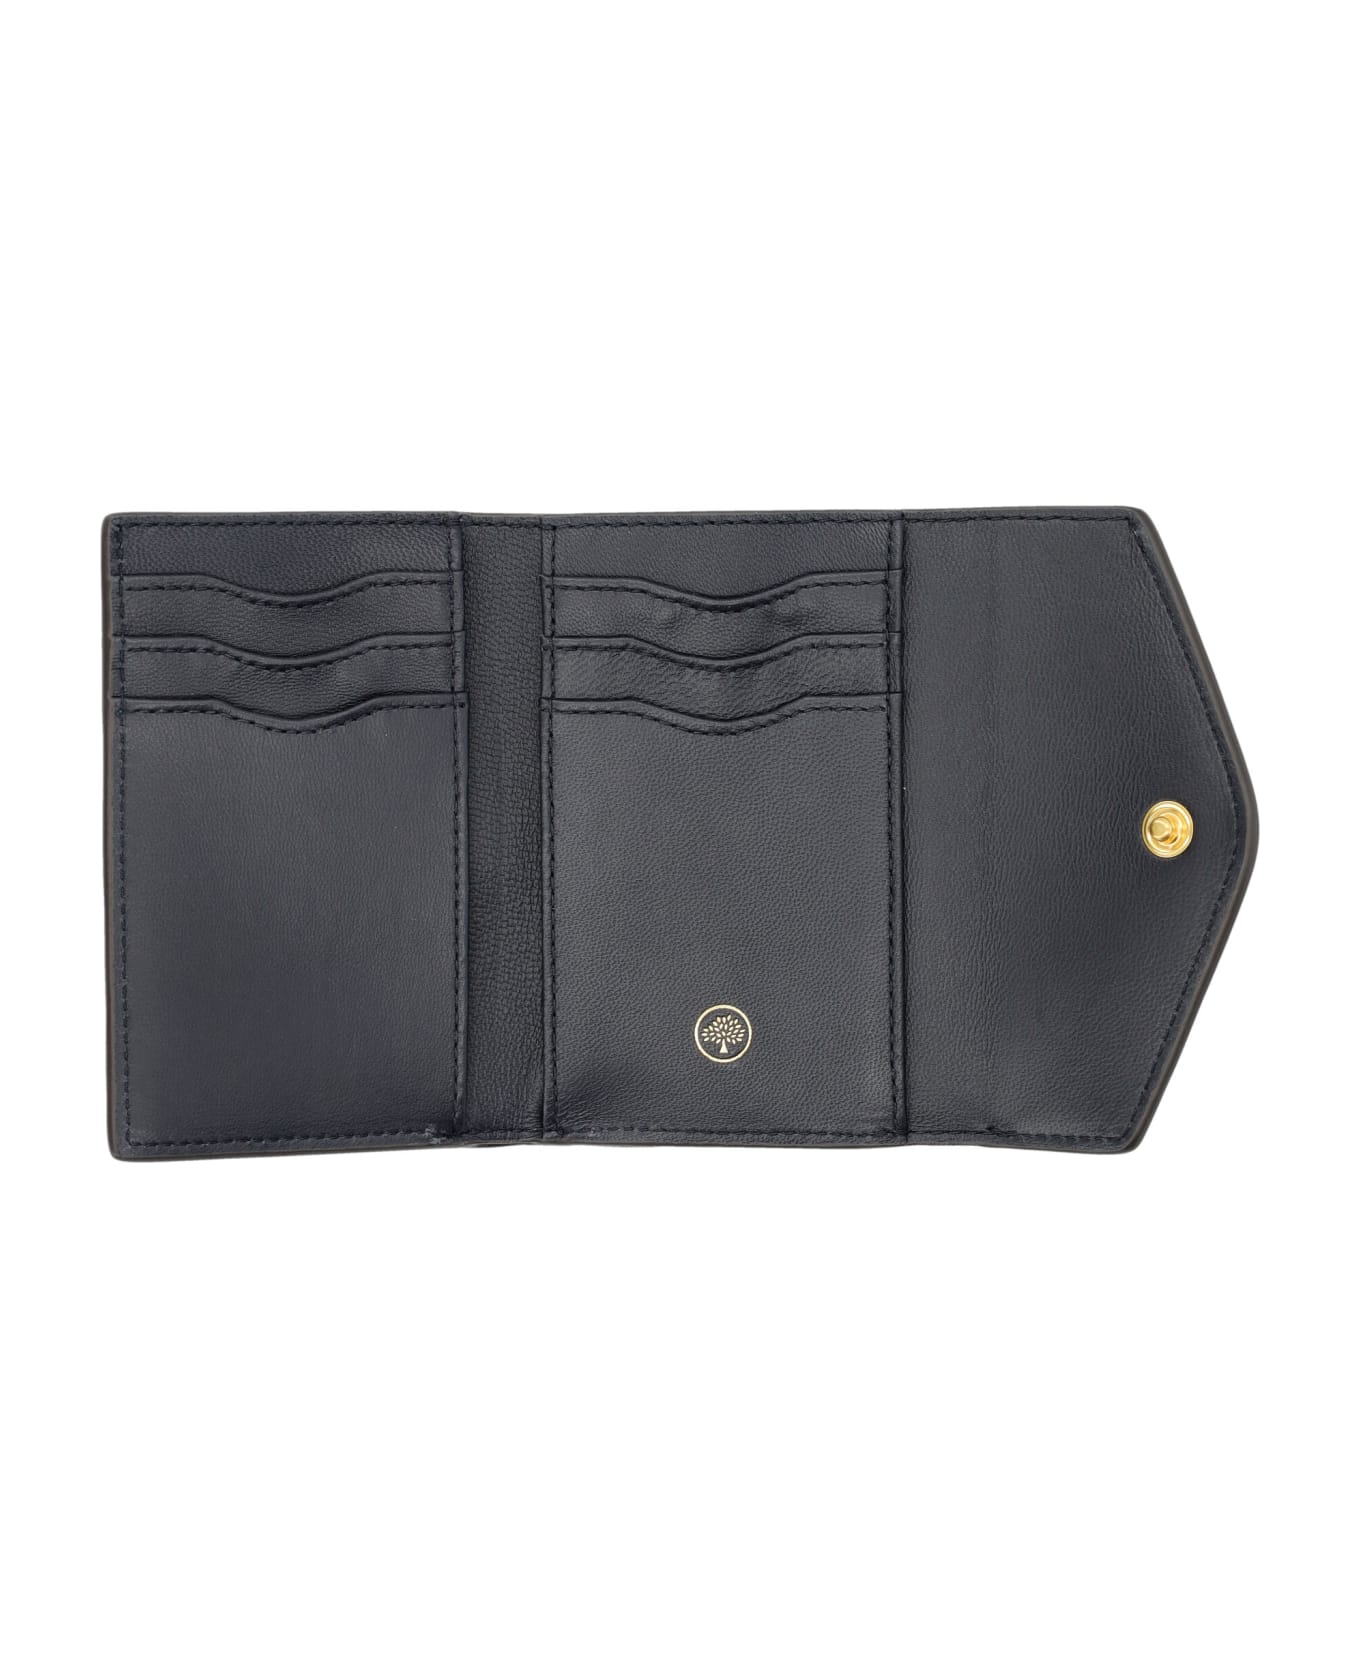 Mulberry Folded Multi-card Wallet - MULBERRY GREEN